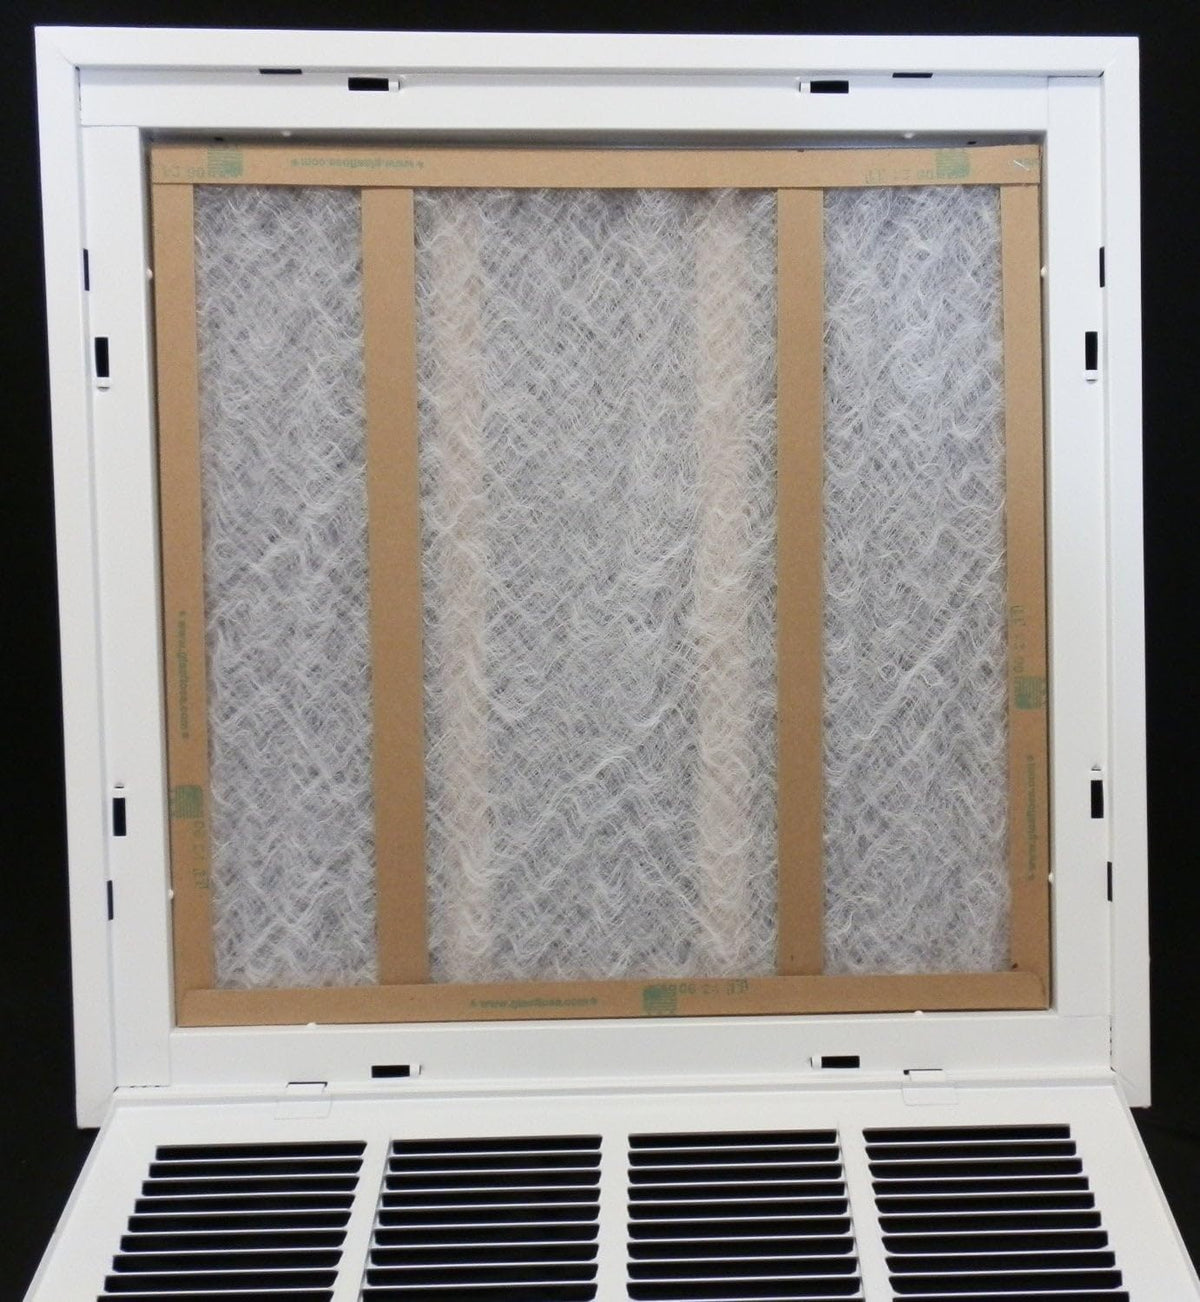 14&quot; X 26&quot; Steel Return Air Filter Grille for 1&quot; Filter - Fixed Hinged - [Outer Dimensions: 16 5/8&quot; X 28 5/8&quot;]